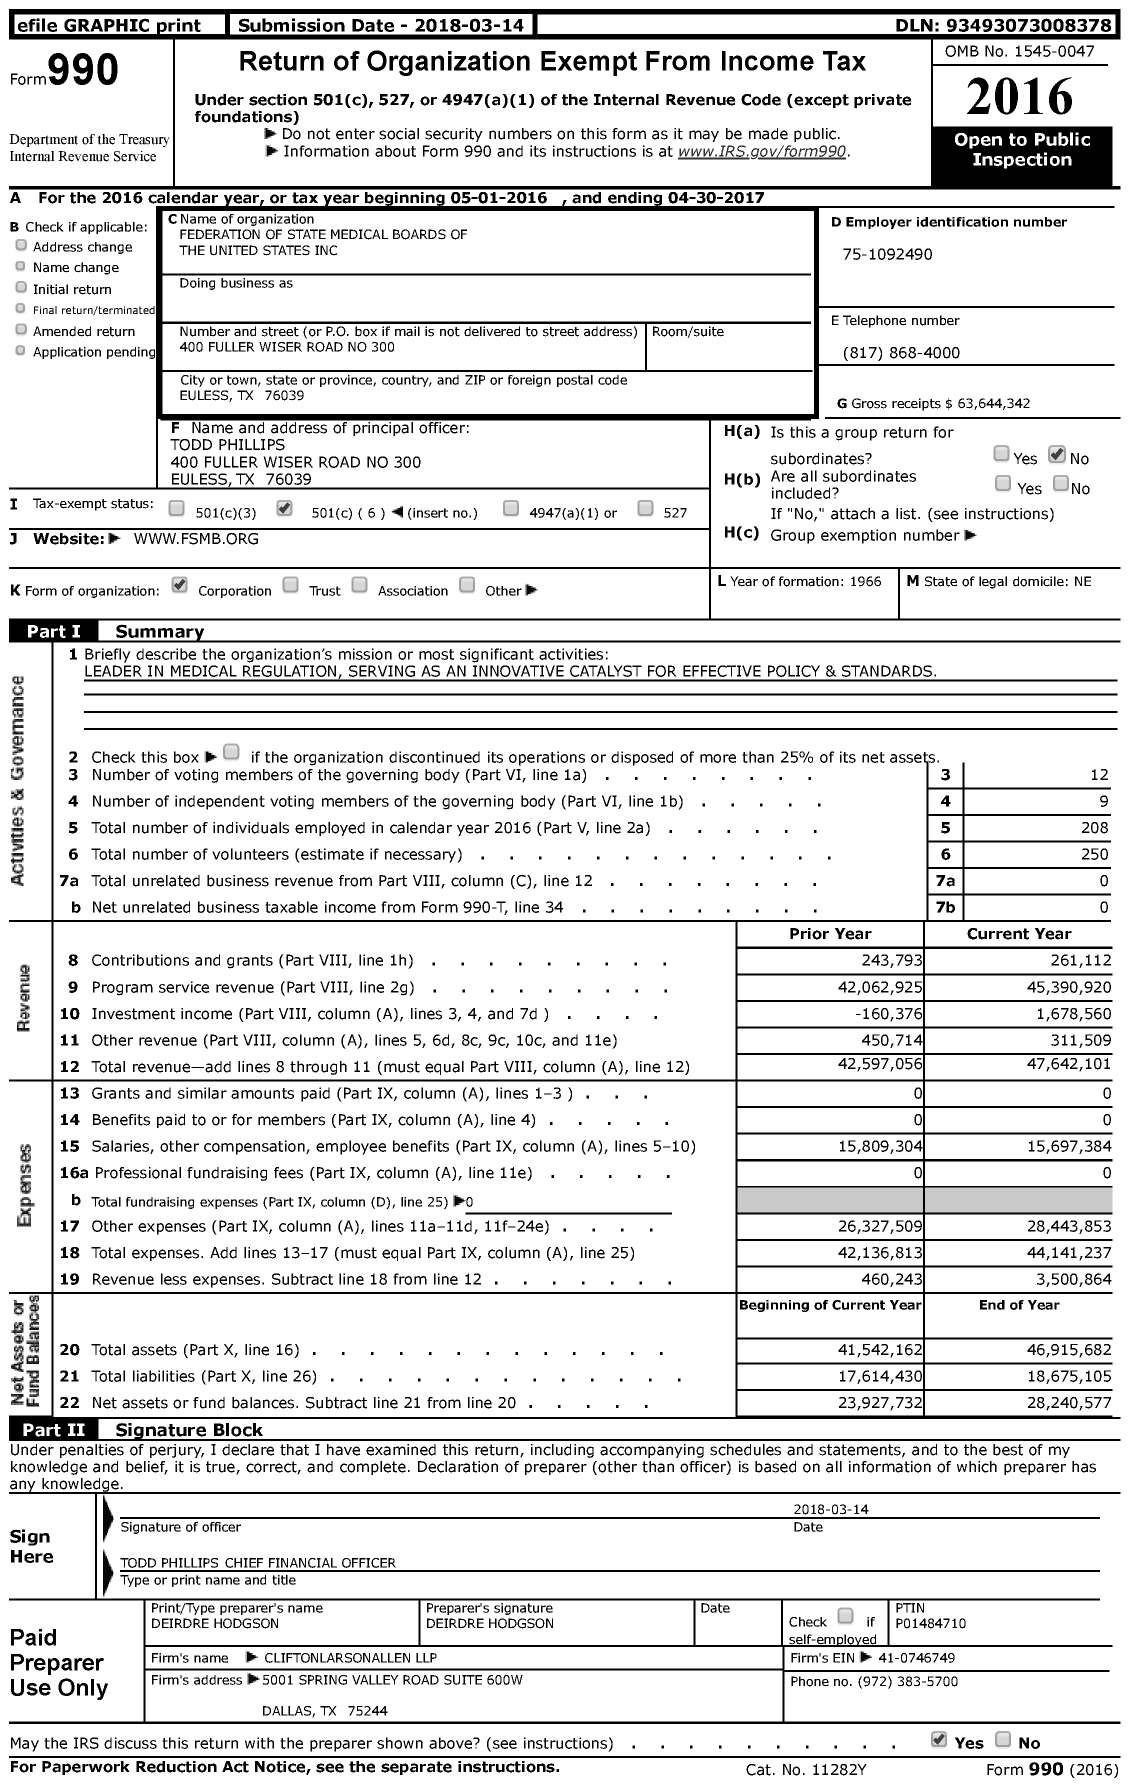 Image of first page of 2016 Form 990 for Federation of State Medical Boards of the United States